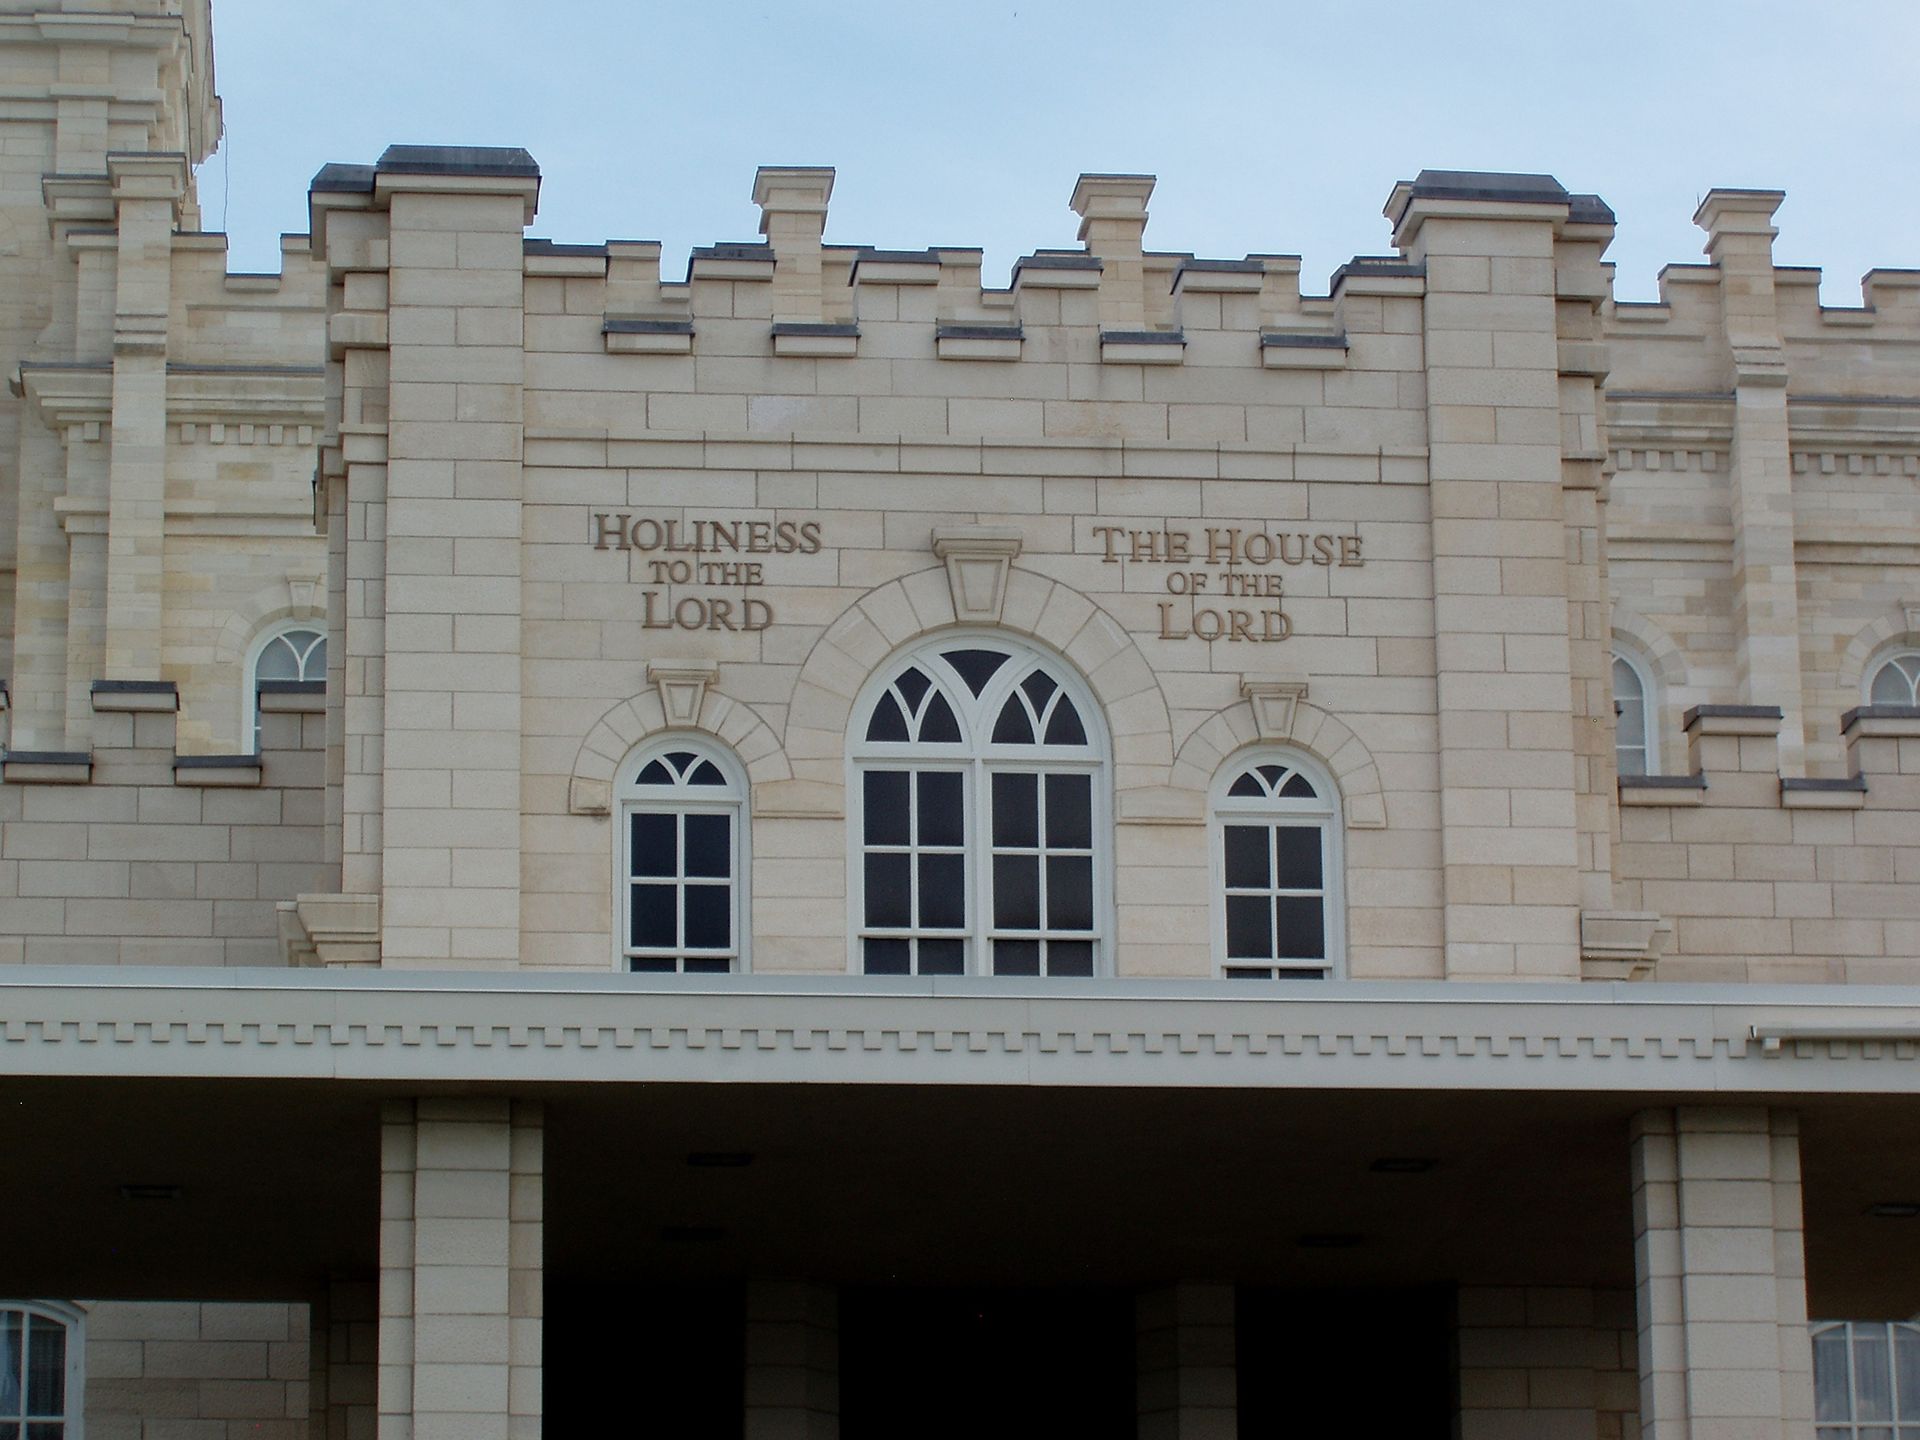 The Manti Utah Temple engraving, “Holiness to the Lord: The House of the Lord,” including the exterior of the temple.